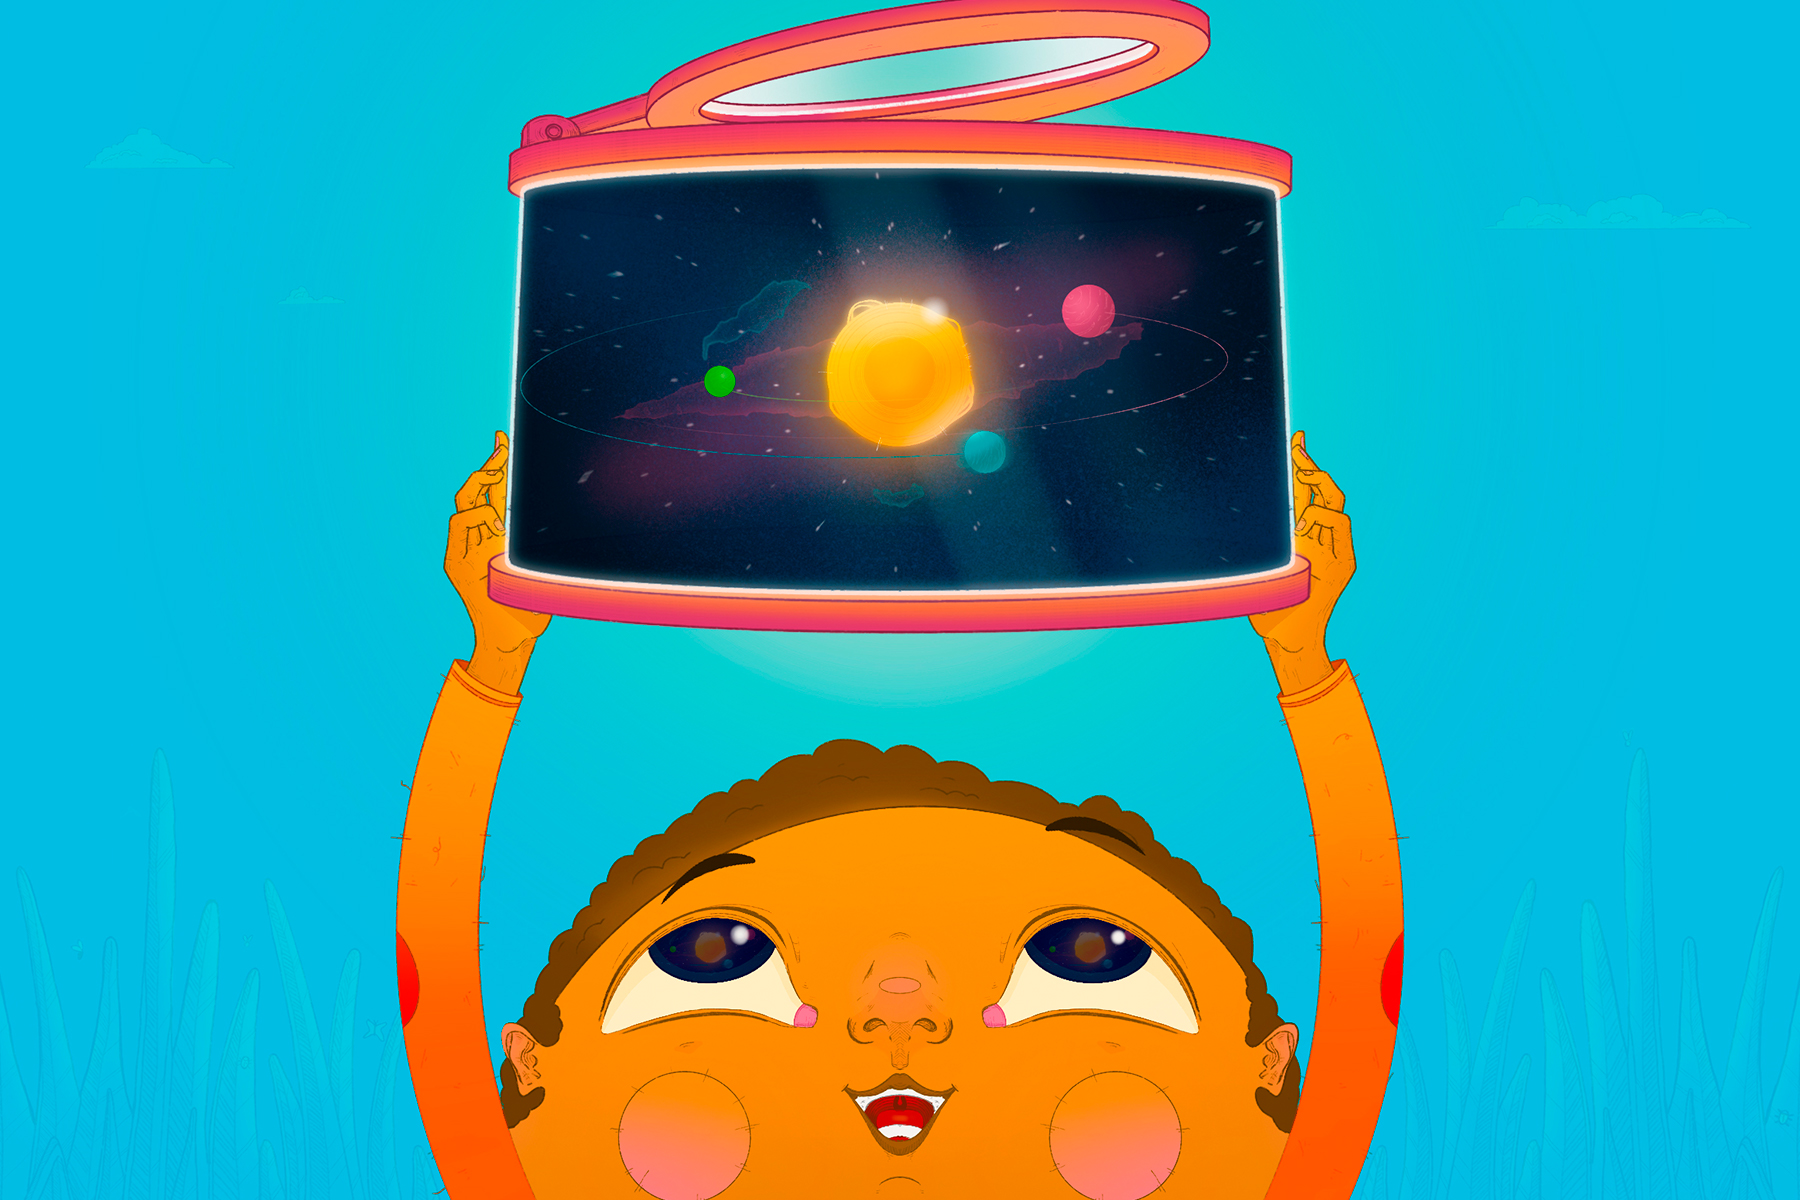 An illustration of a child looking up into a bug viewer, with a universe inside